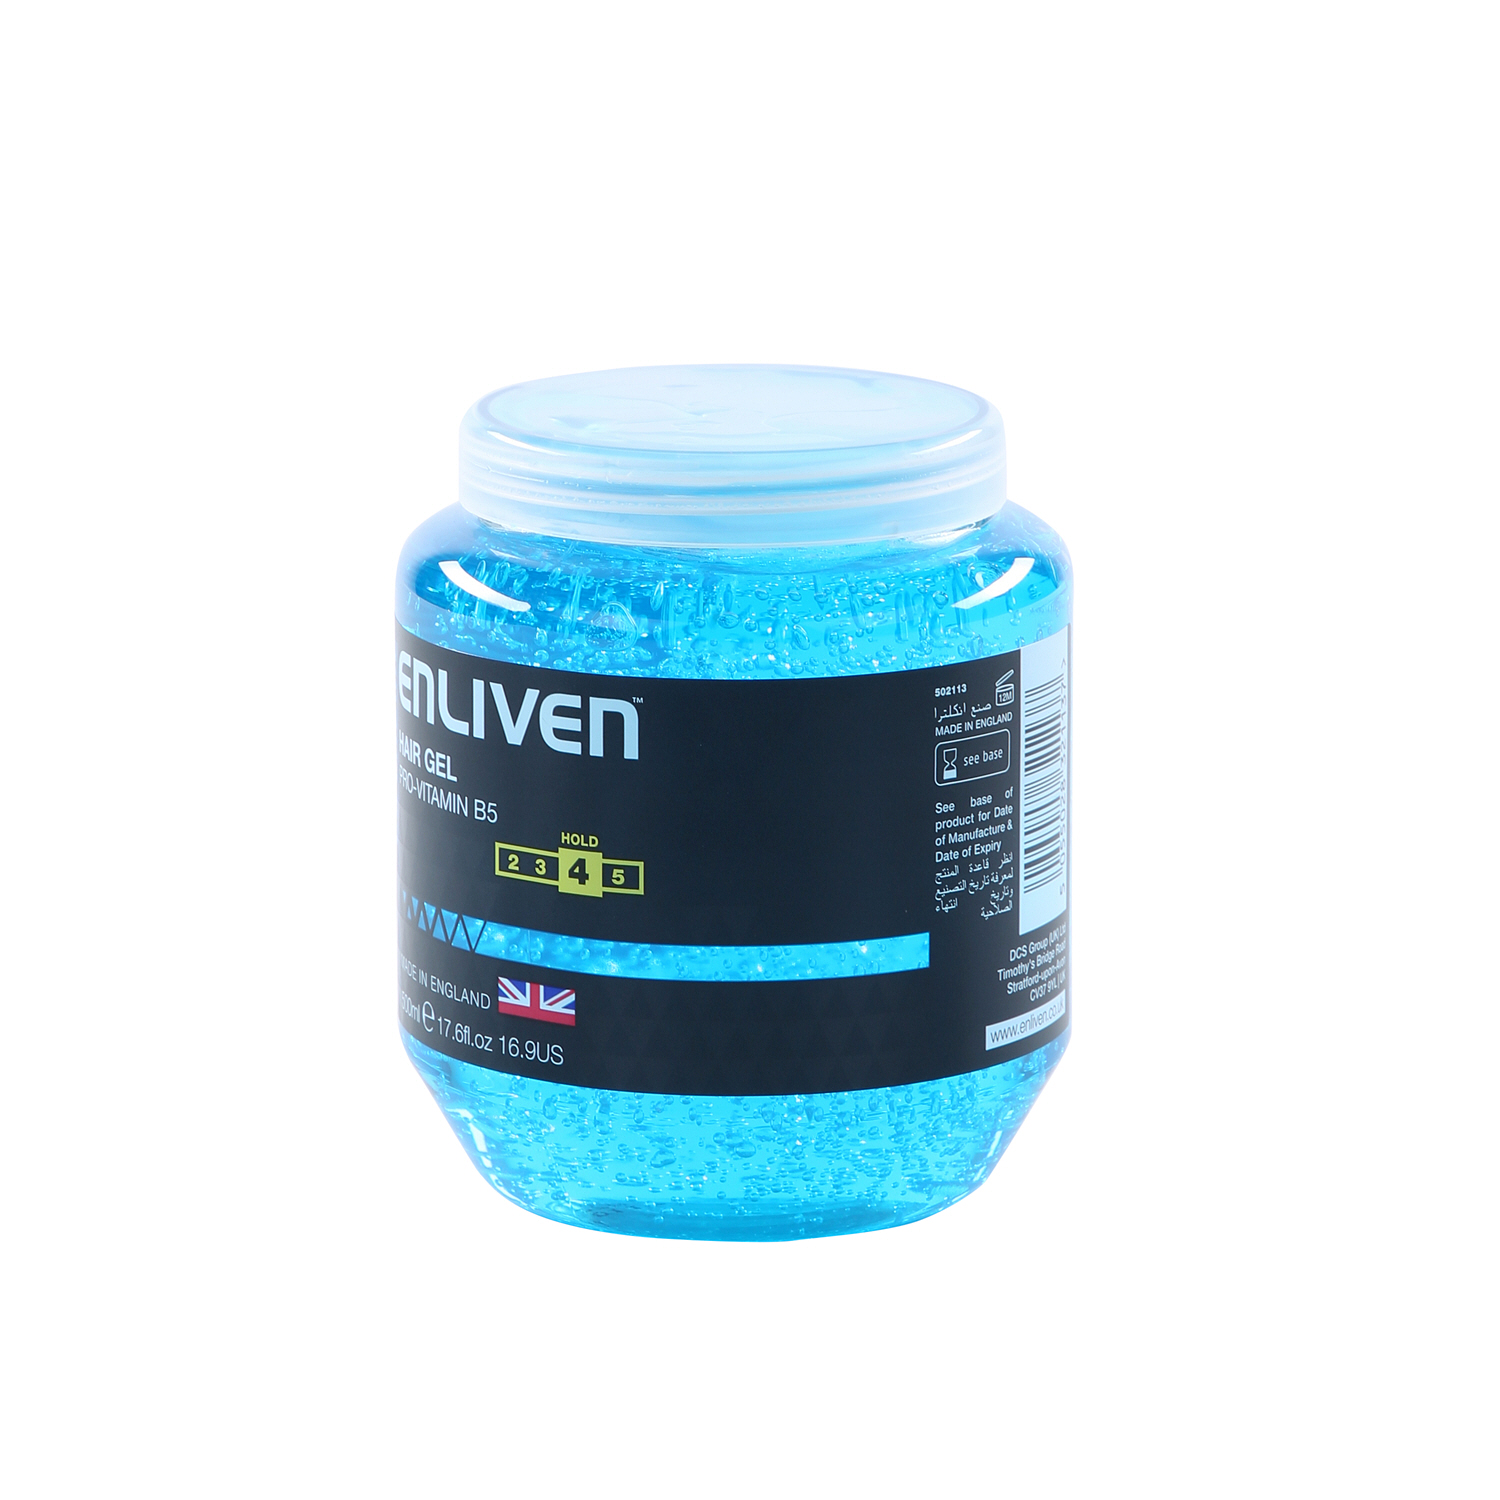 Enliven Hair Gel Extra Firm 500gm